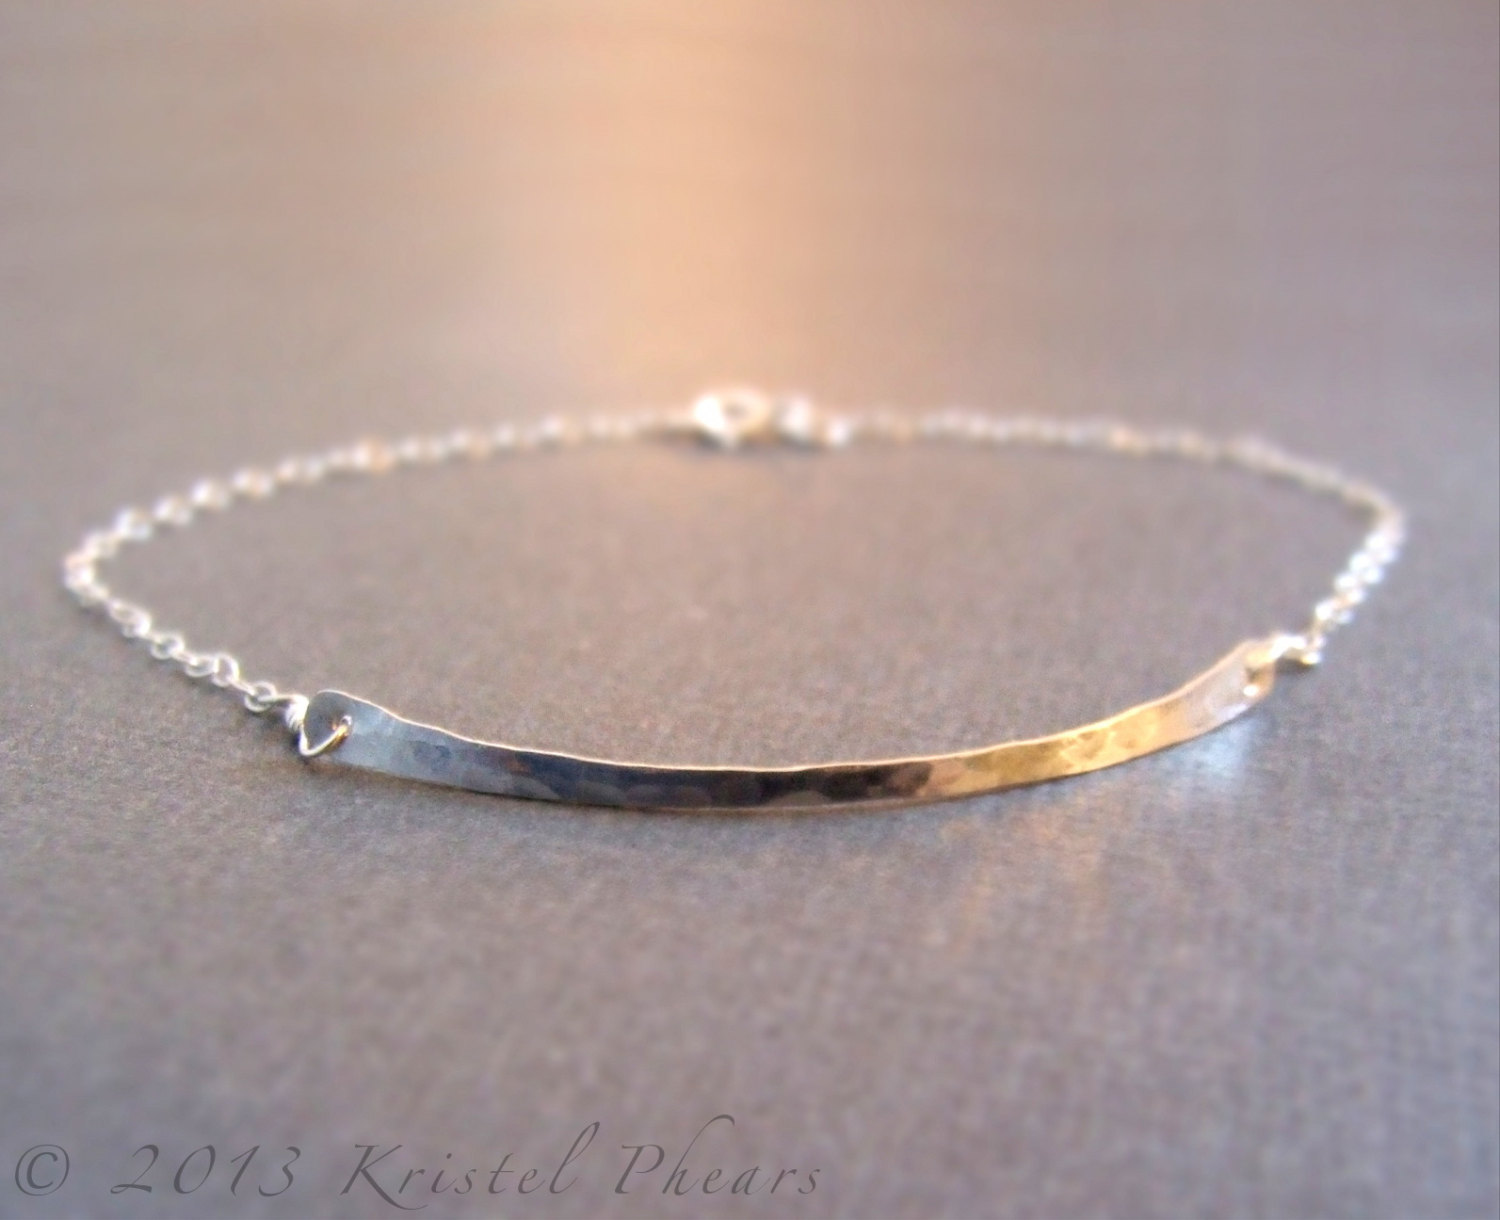 Hammered Bar Bracelet in Silver, Gold, or Rose-Gold - Eco-Friendly recycled orig - $25.00